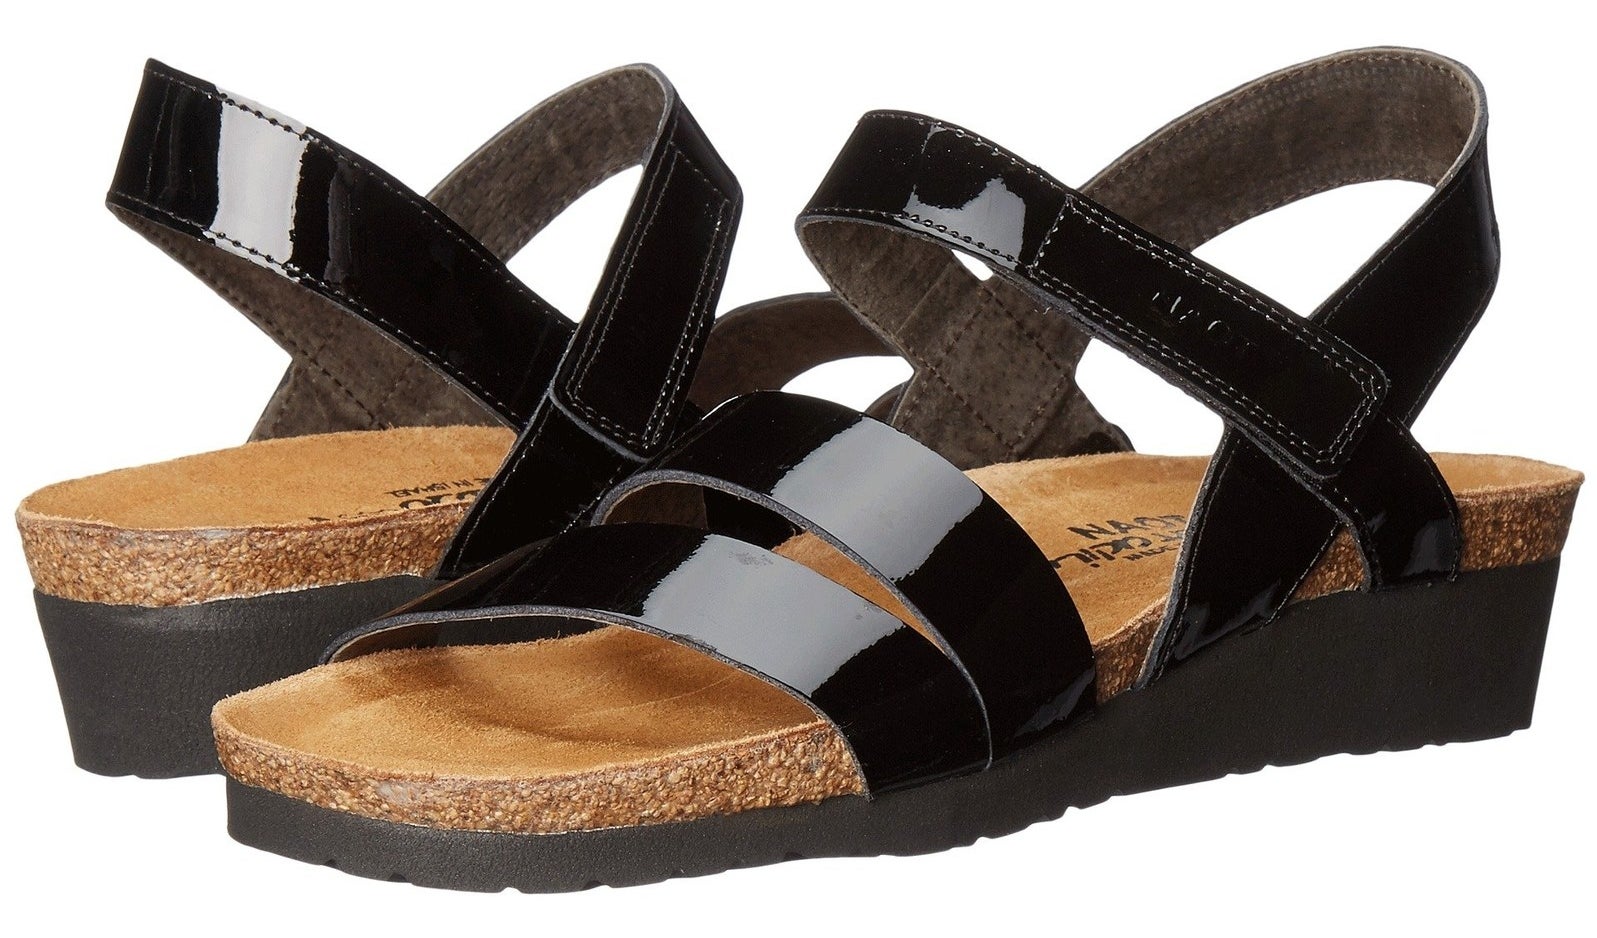 A pair of the Naot adjustable leather sandals in black patent. 